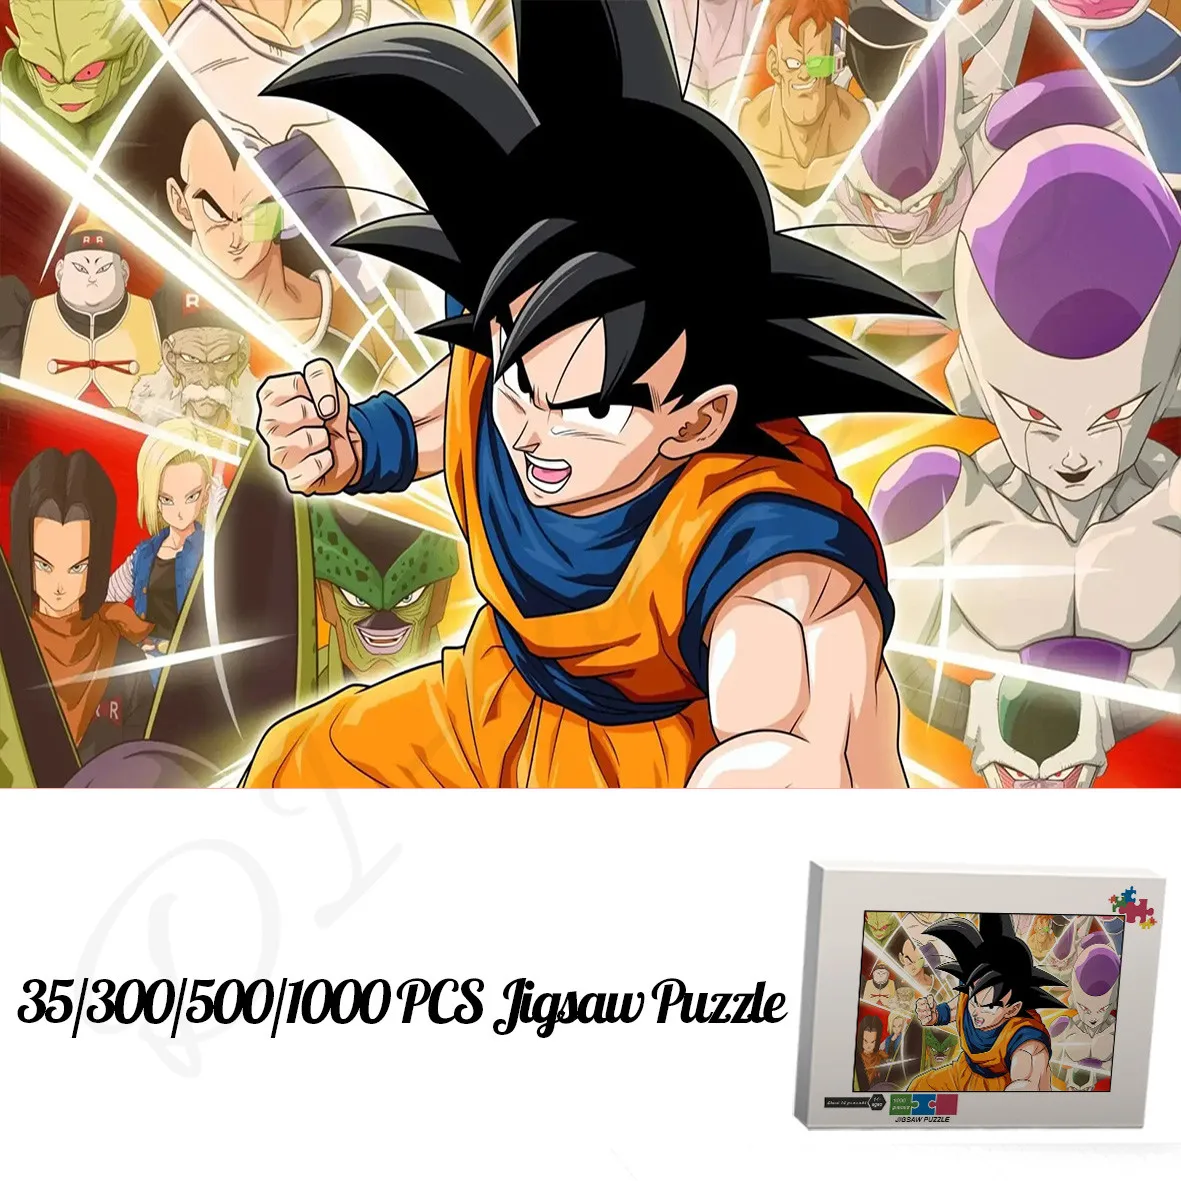 Goku Jigsaw Puzzles for Kids and Adults Classic Anime Dragon Ball 1000 Pieces Wooden Puzzles Educational Toys for Entertainment a3 puzzles starry night wooden assembling picture landscape jigsaw puzzles toys for adults children games educational toys